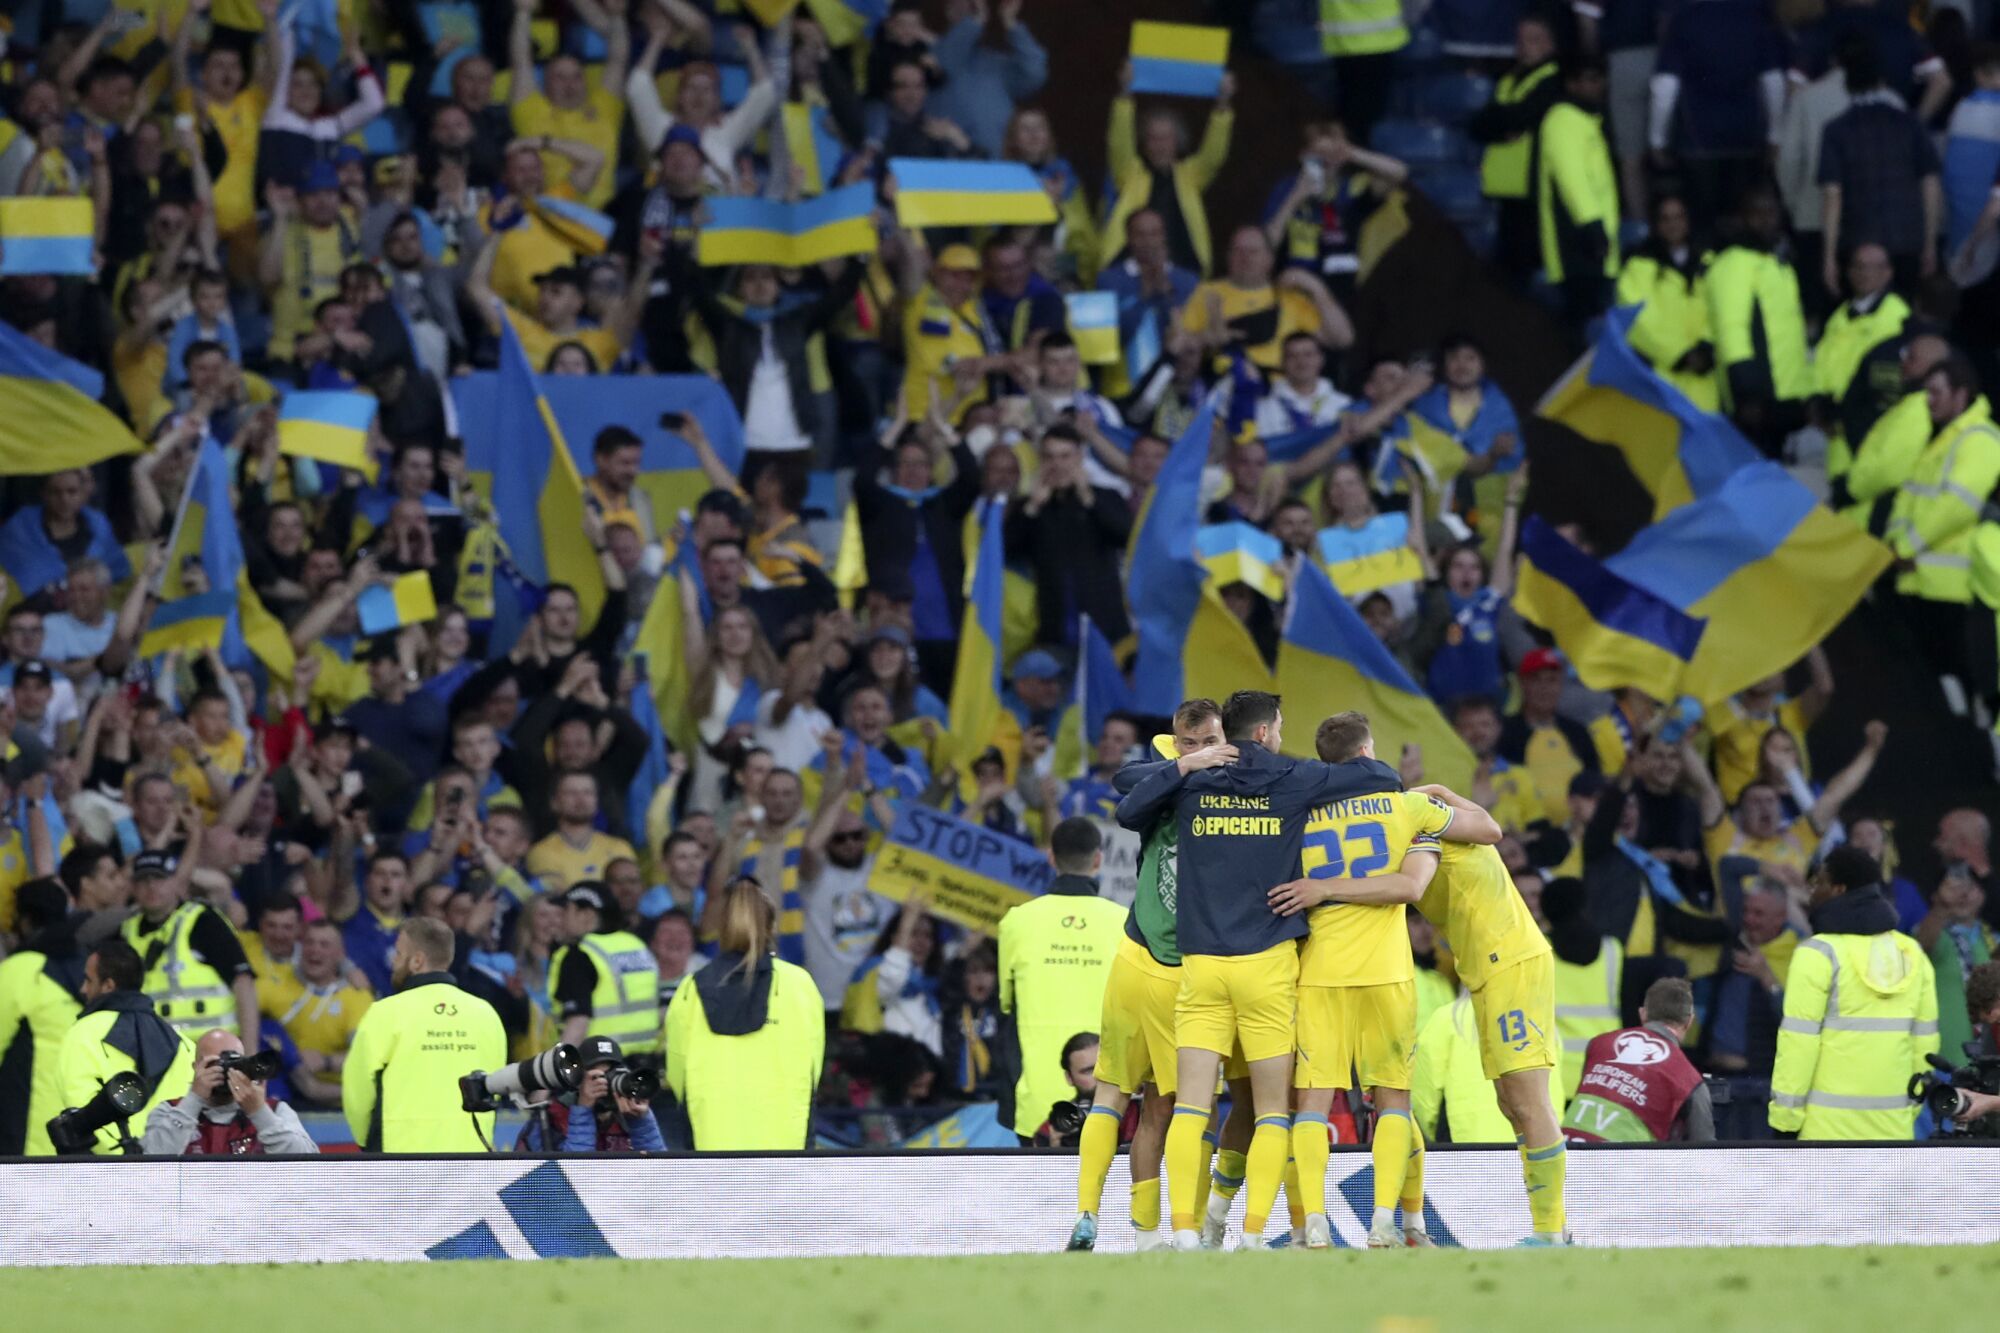 Ukrainian players celebrate after defeating Scotland 3-1 in a World Cup qualifier Wednesday in Glasgow, Scotland.